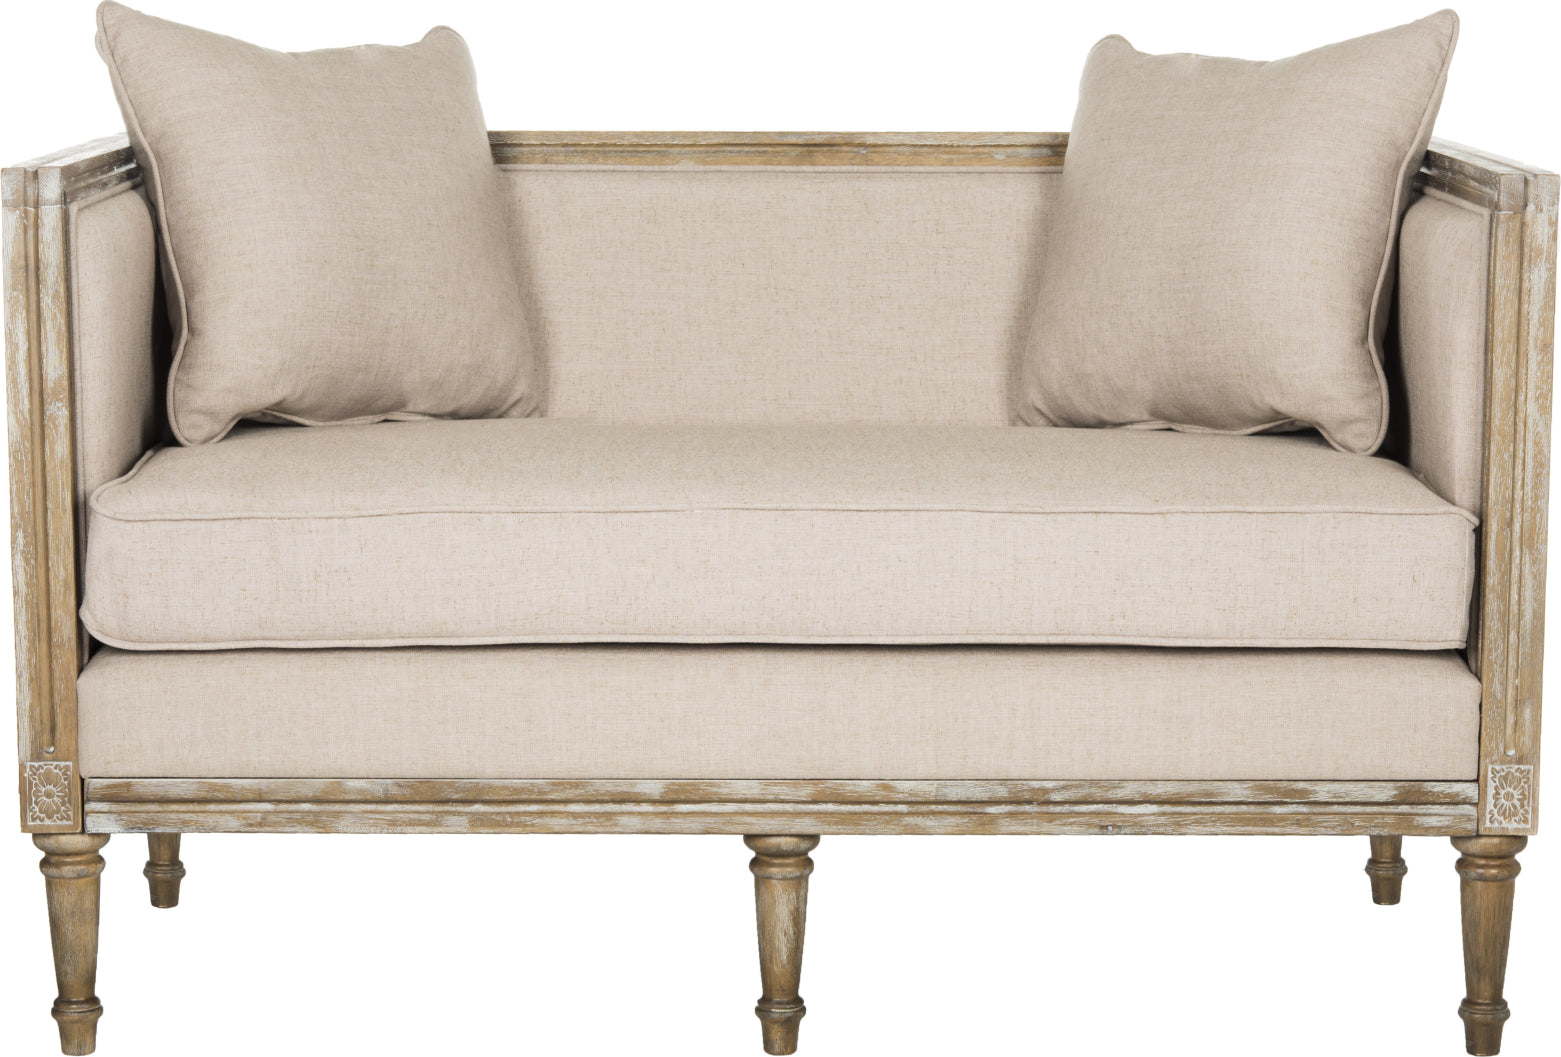 Safavieh Leandra Linen French Country Settee Taupe and Rustic Oak Furniture main image